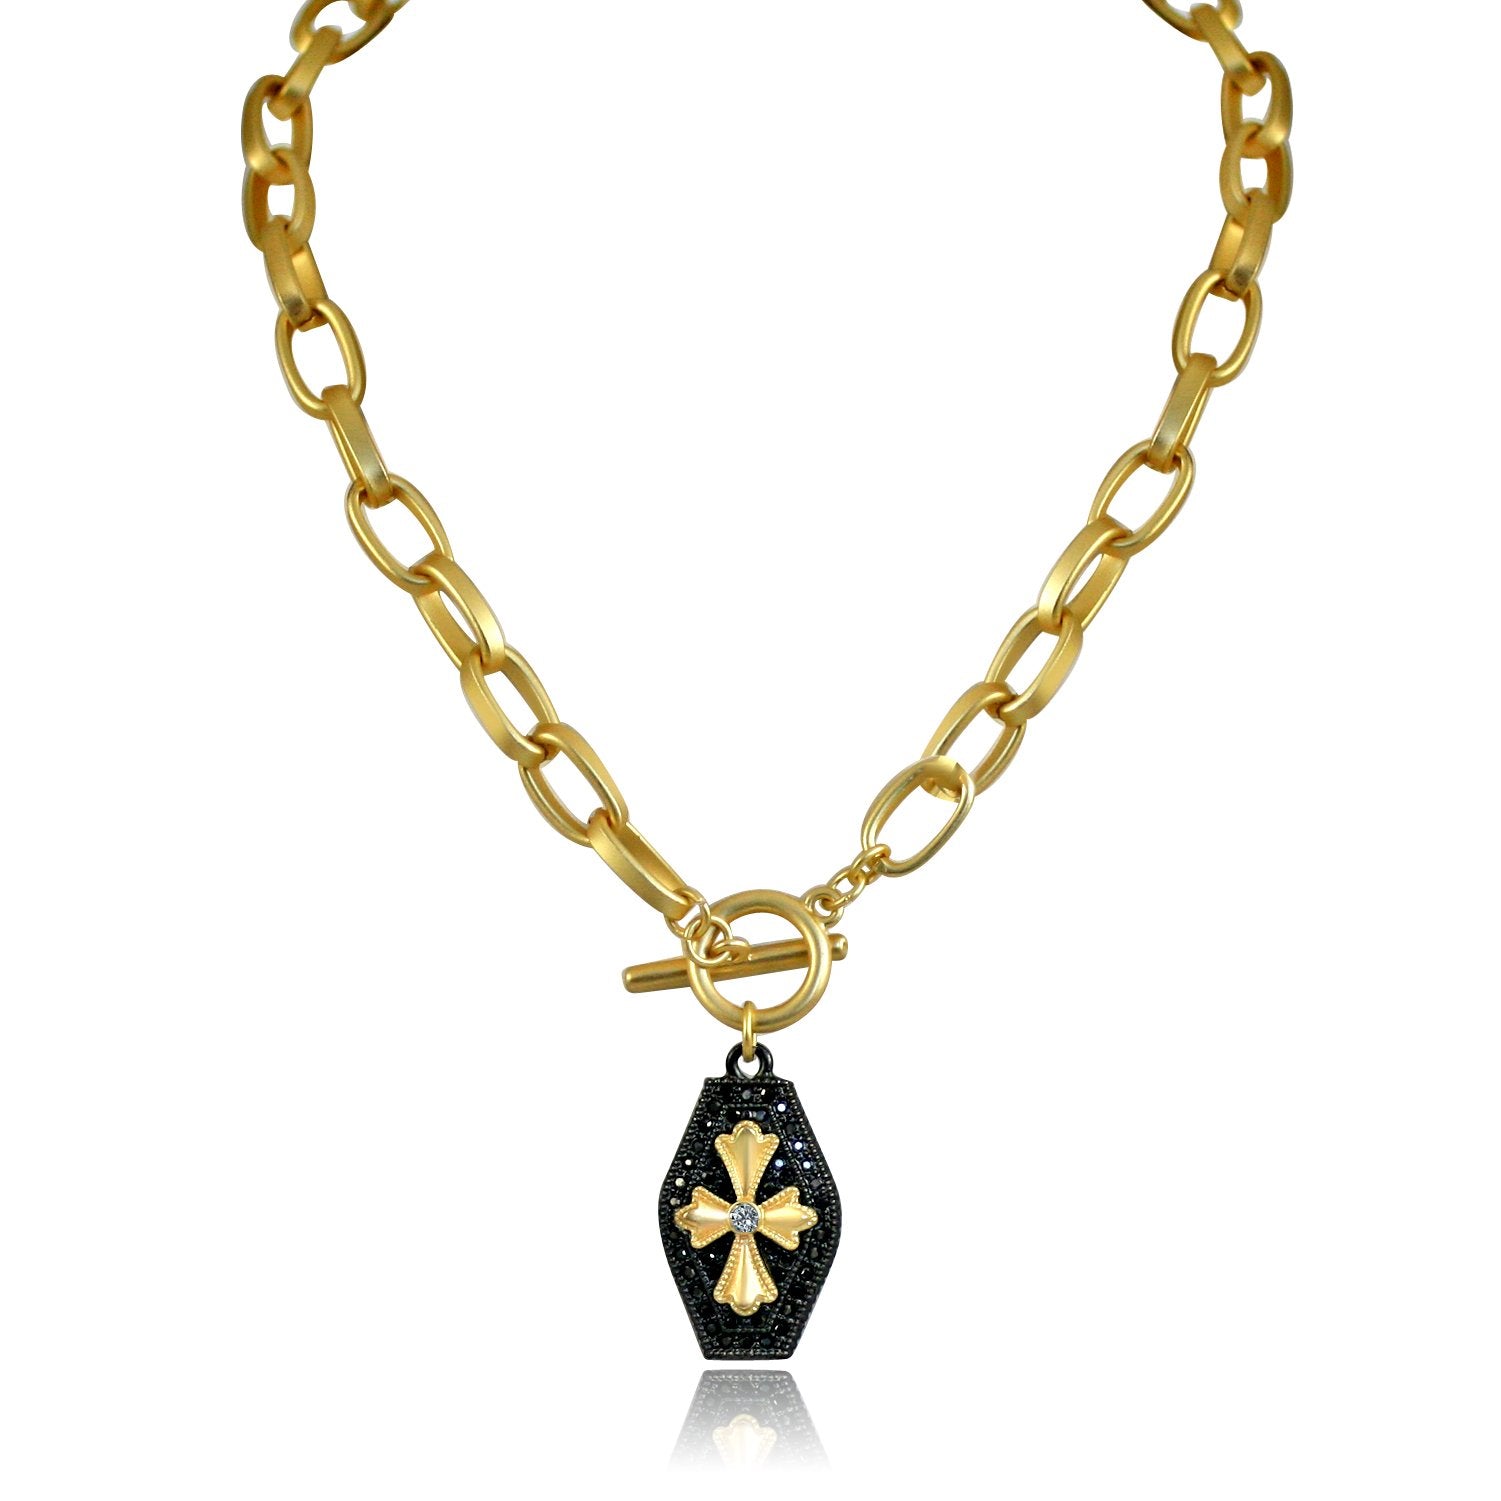 Black and Gold Pendant Paved with Black Diamond and Cubic Zirconia in the Center Elongated Chain Link Toggle Clasp 689N647